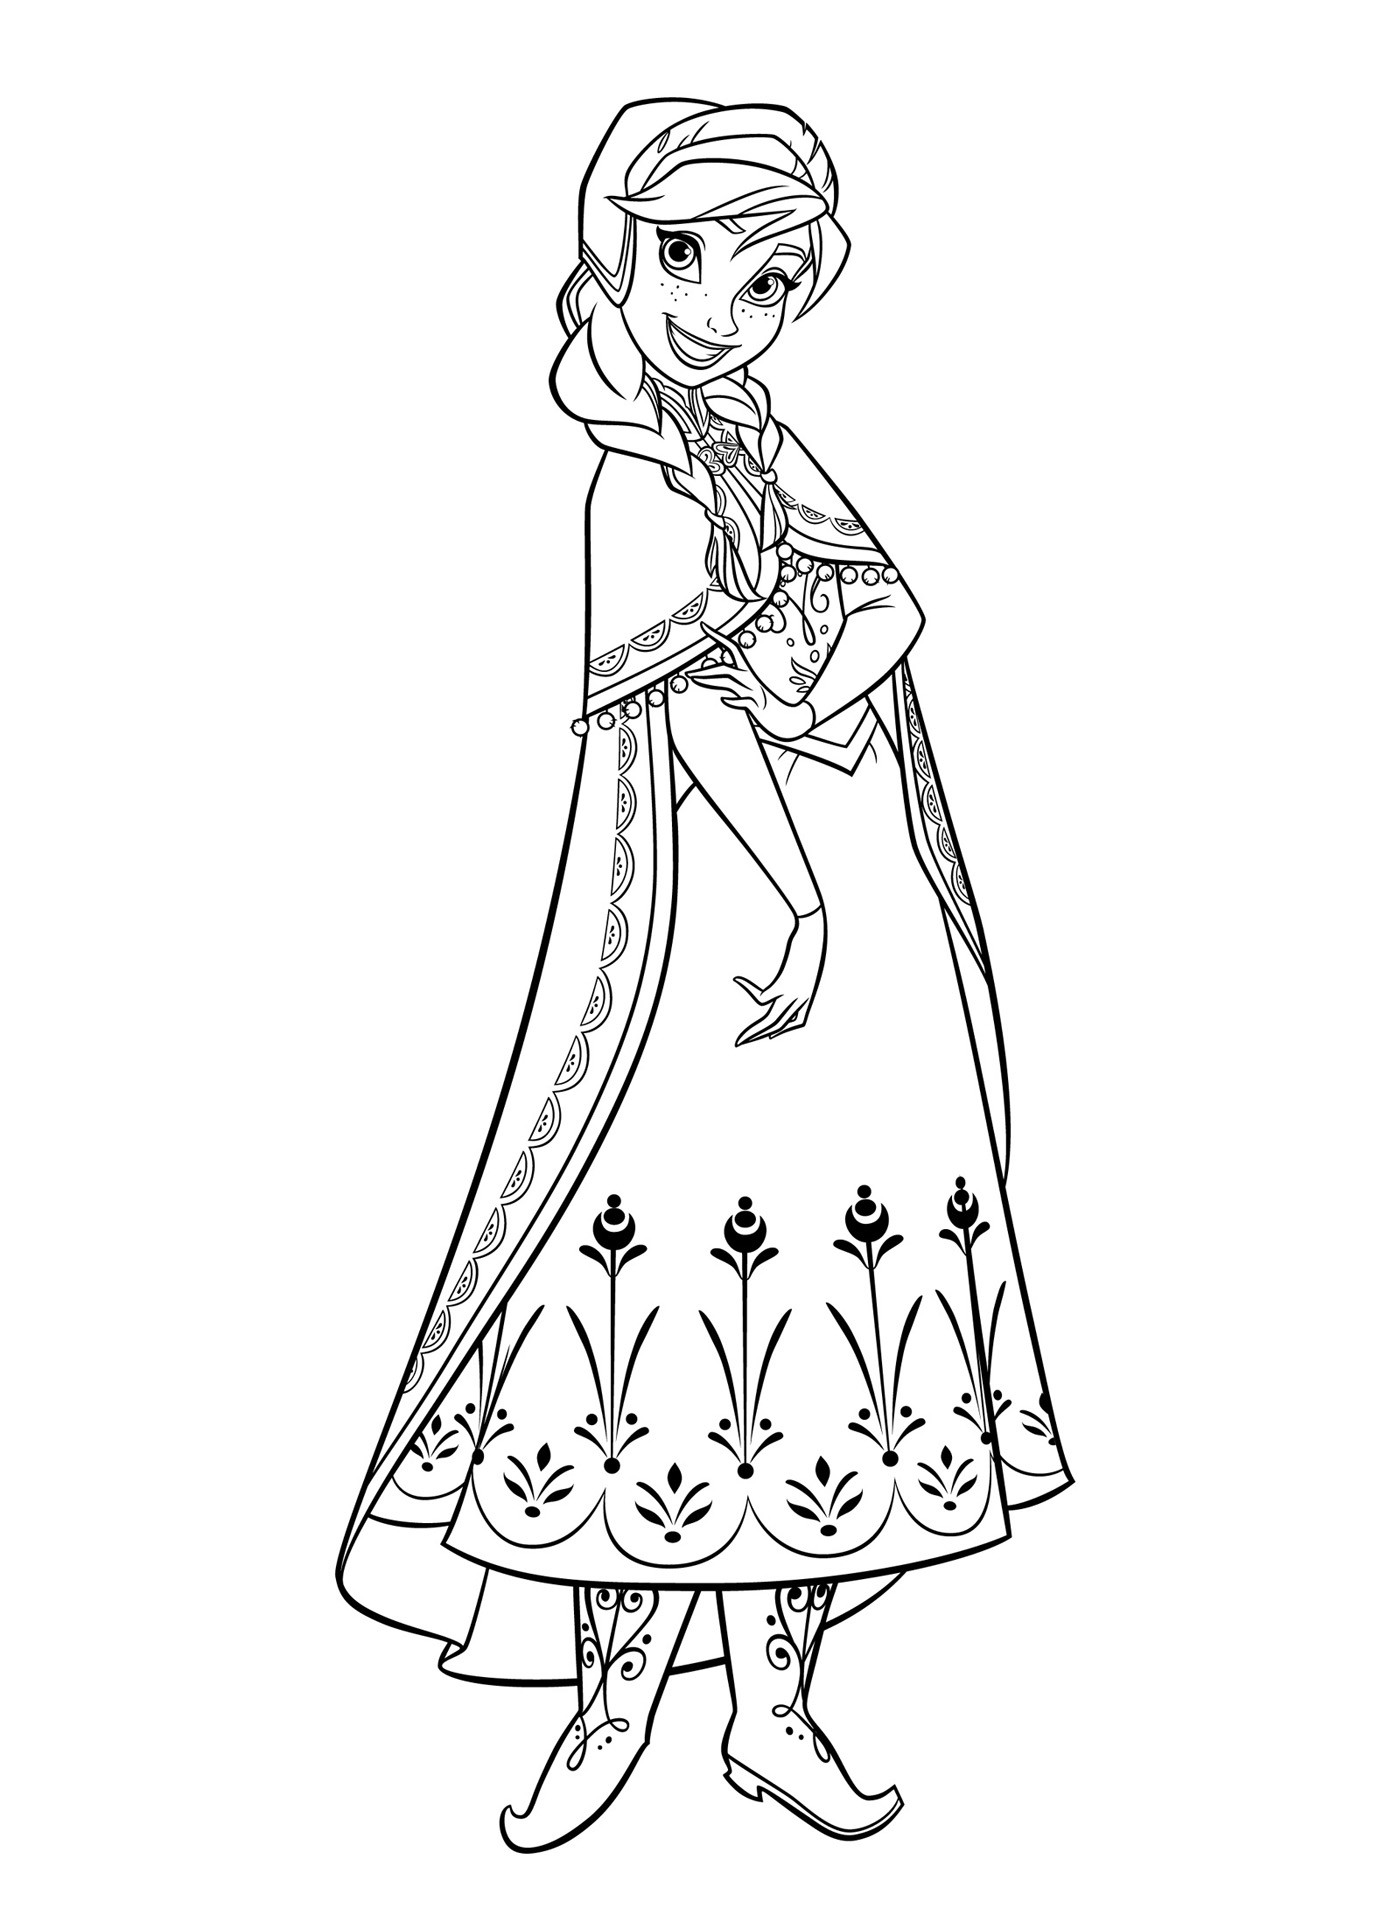 Frozen Fever Elsa Coloring Pages at GetDrawings Free